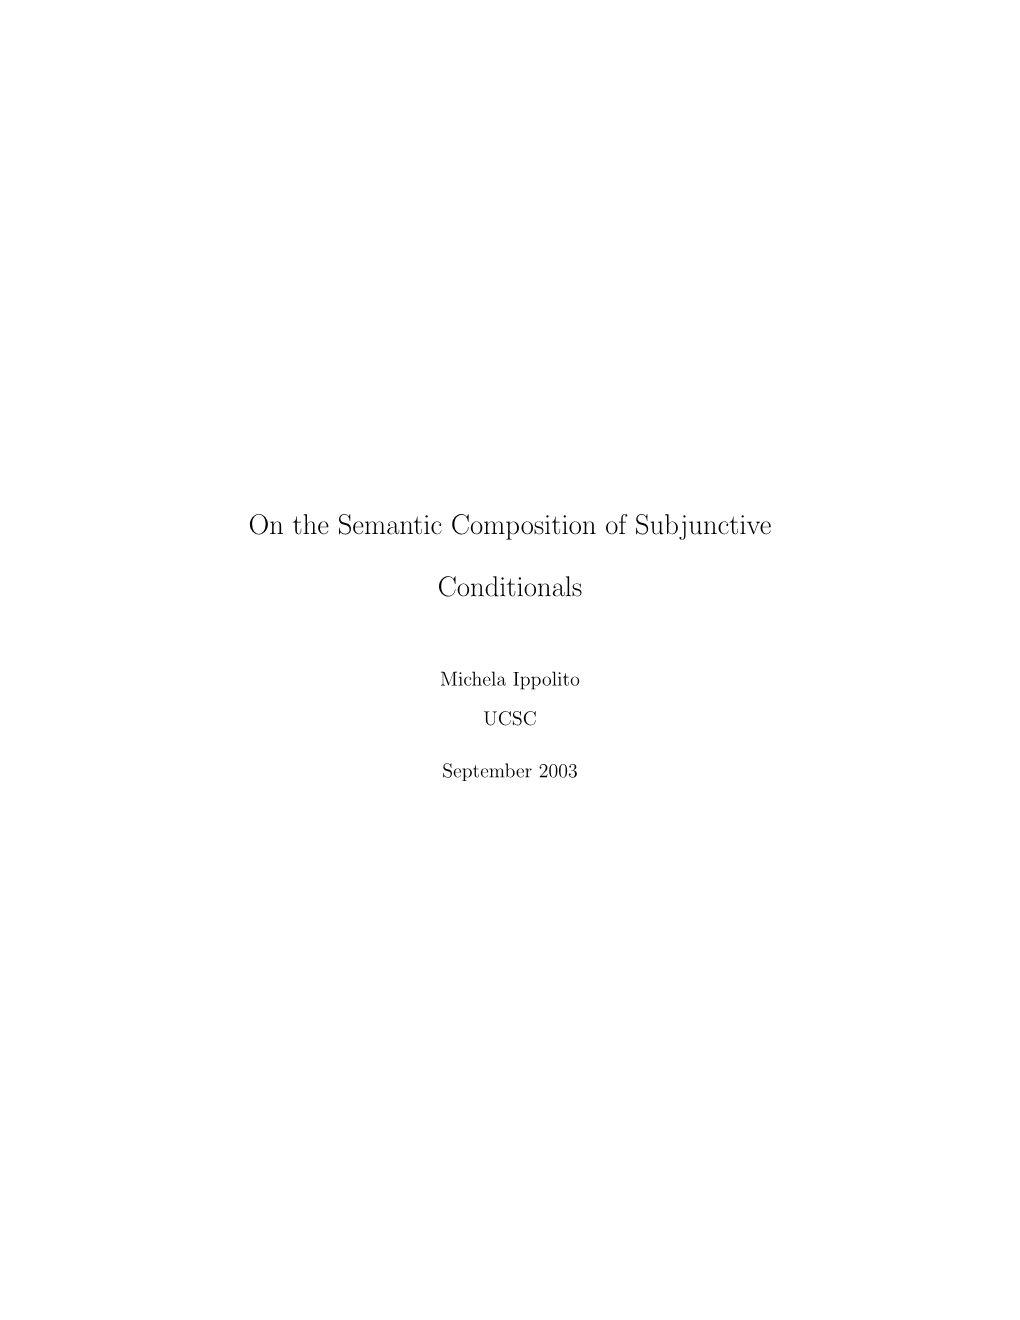 On the Semantic Composition of Subjunctive Conditionals